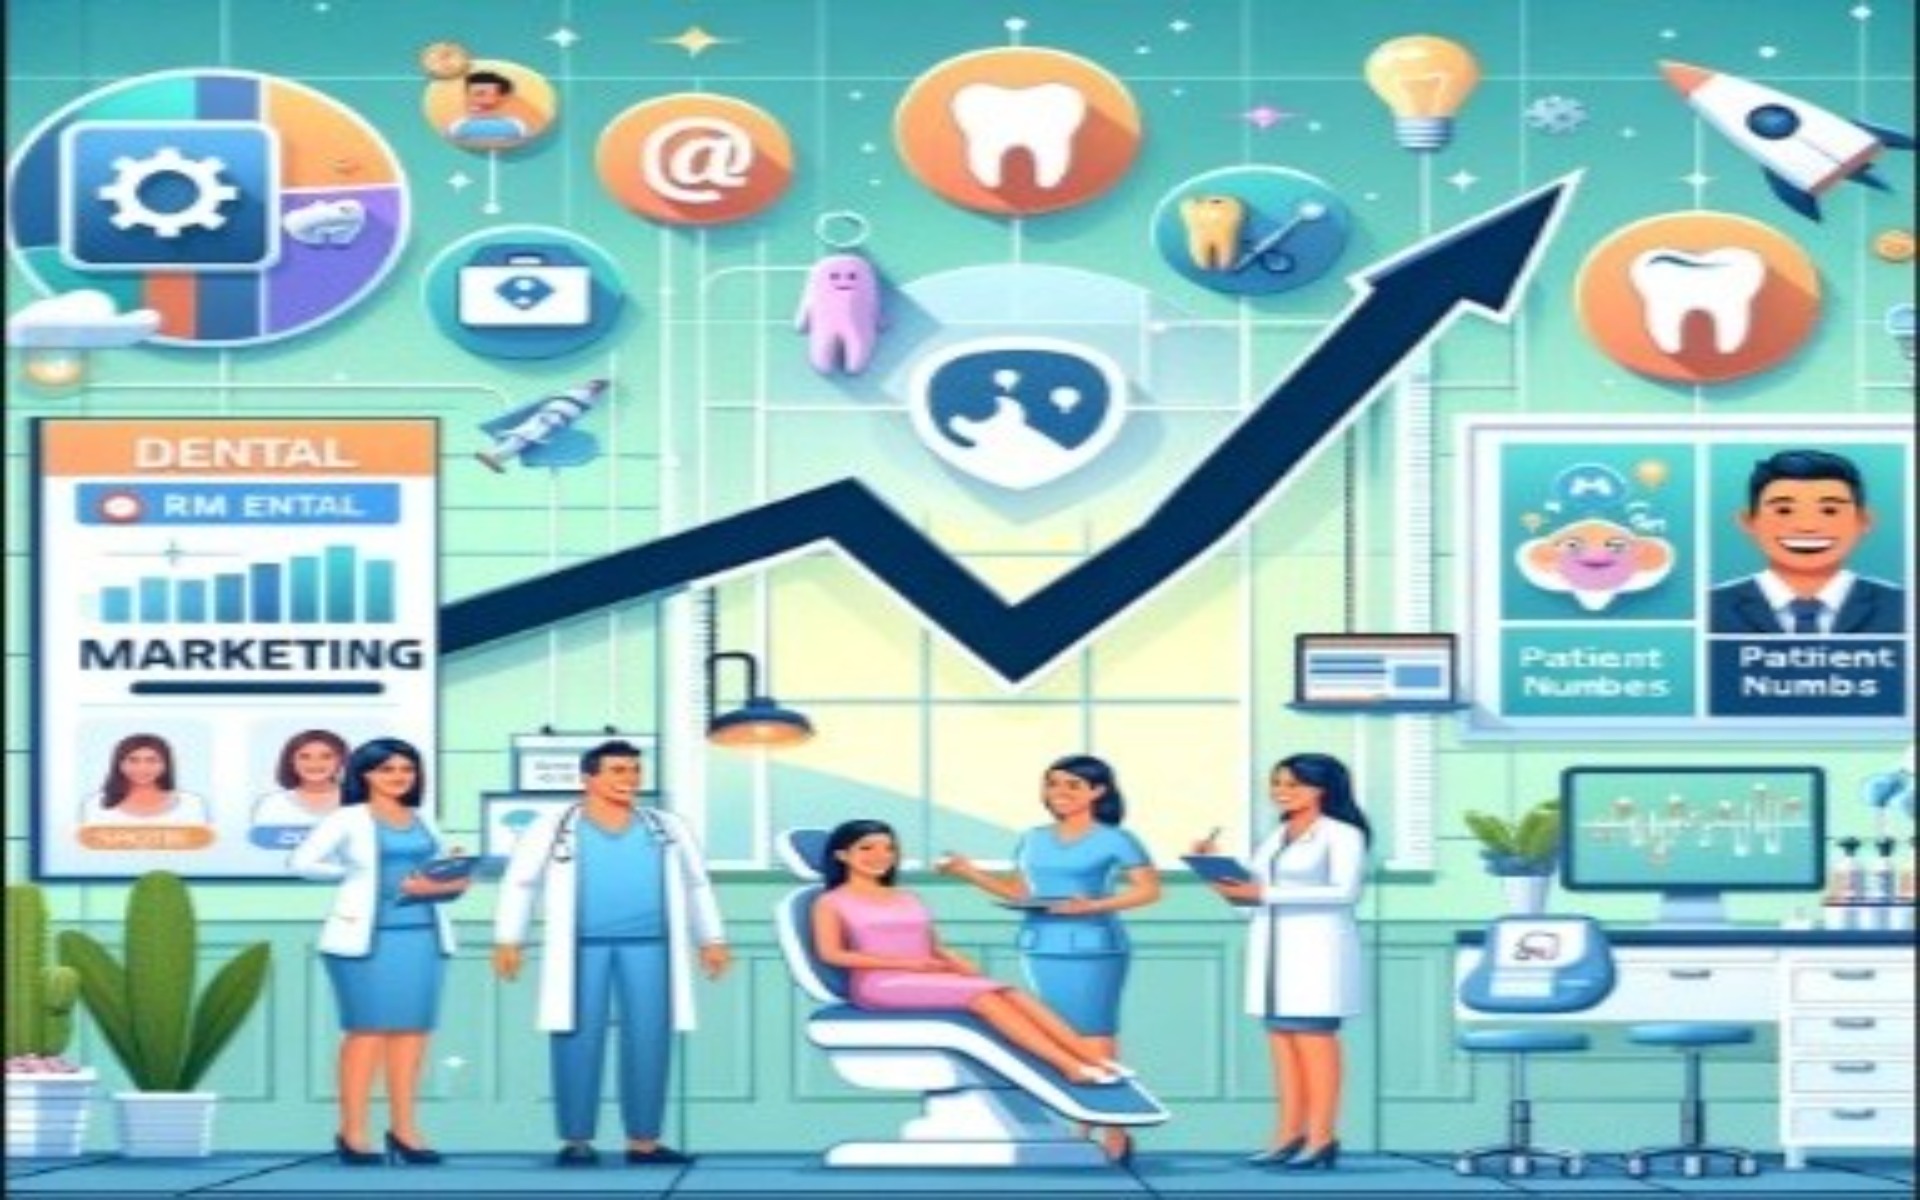 Dental Marketing Strategies Tips to Increase Patient Numbers and Awareness.